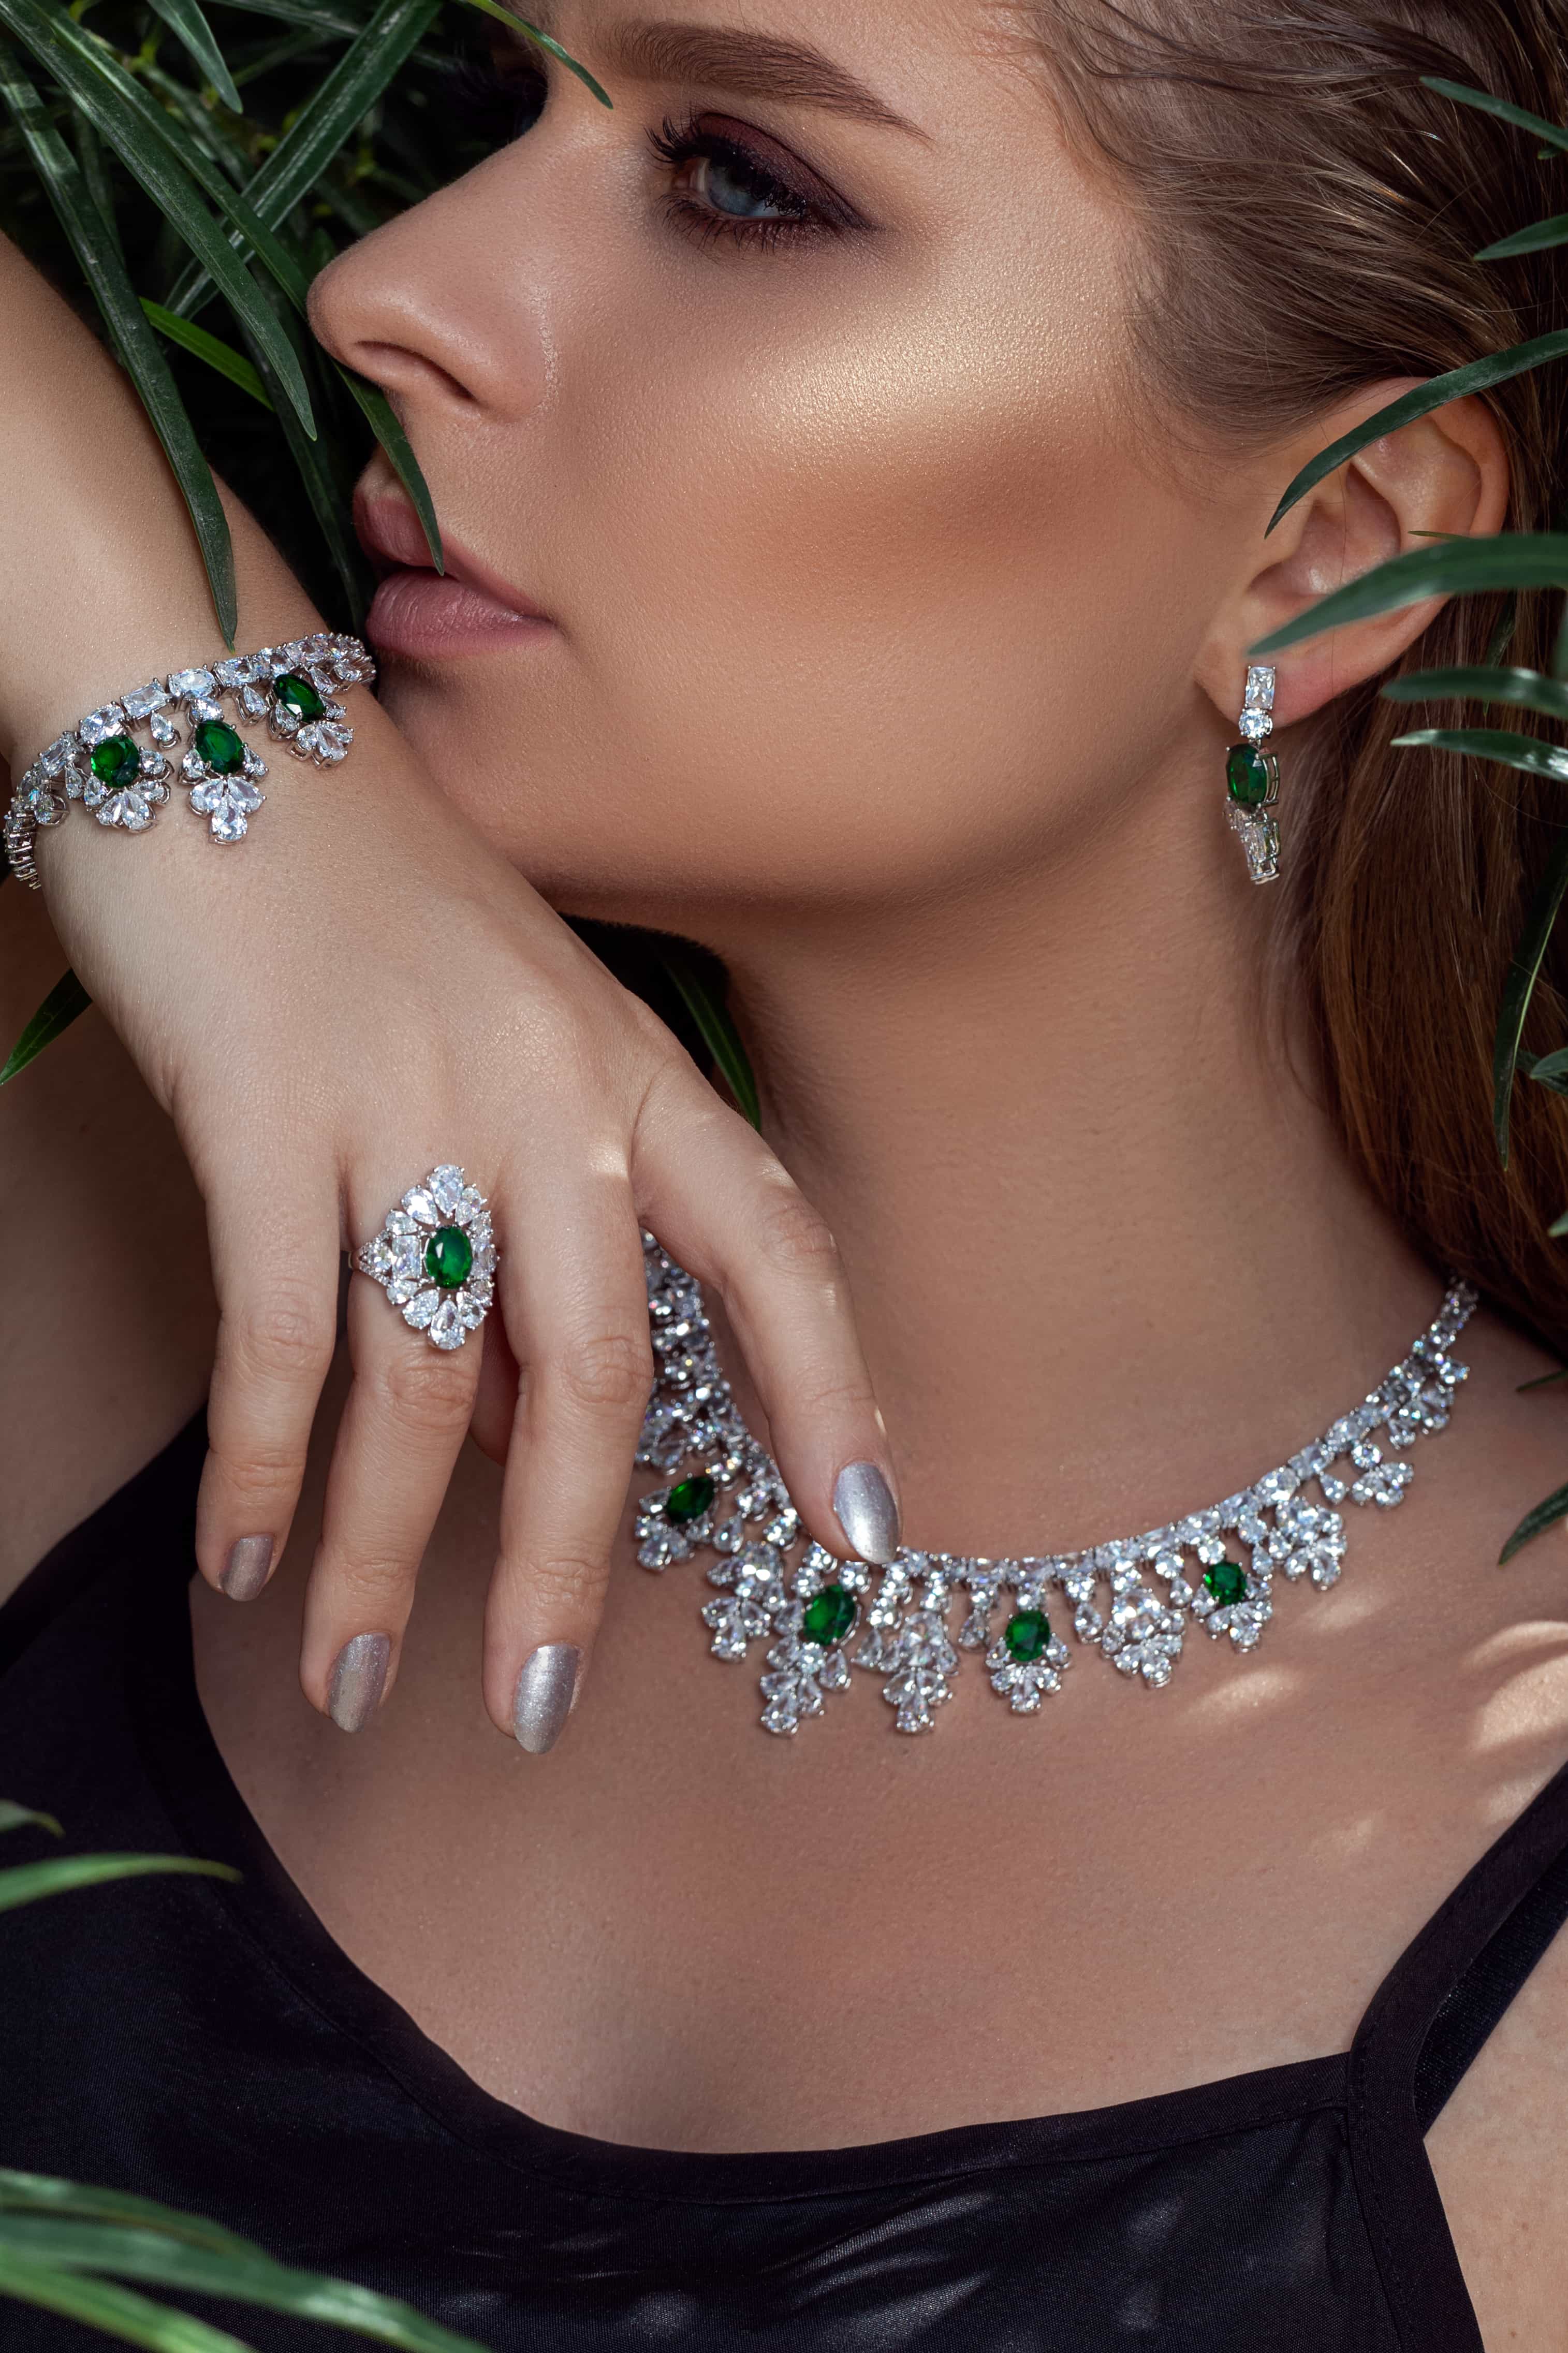 Capture The Beauty And Elegance Of Your Jewelry With Expert Photography Services. Contact DubaiContent.Pro For Stunning Commercial Jewelry Photography.